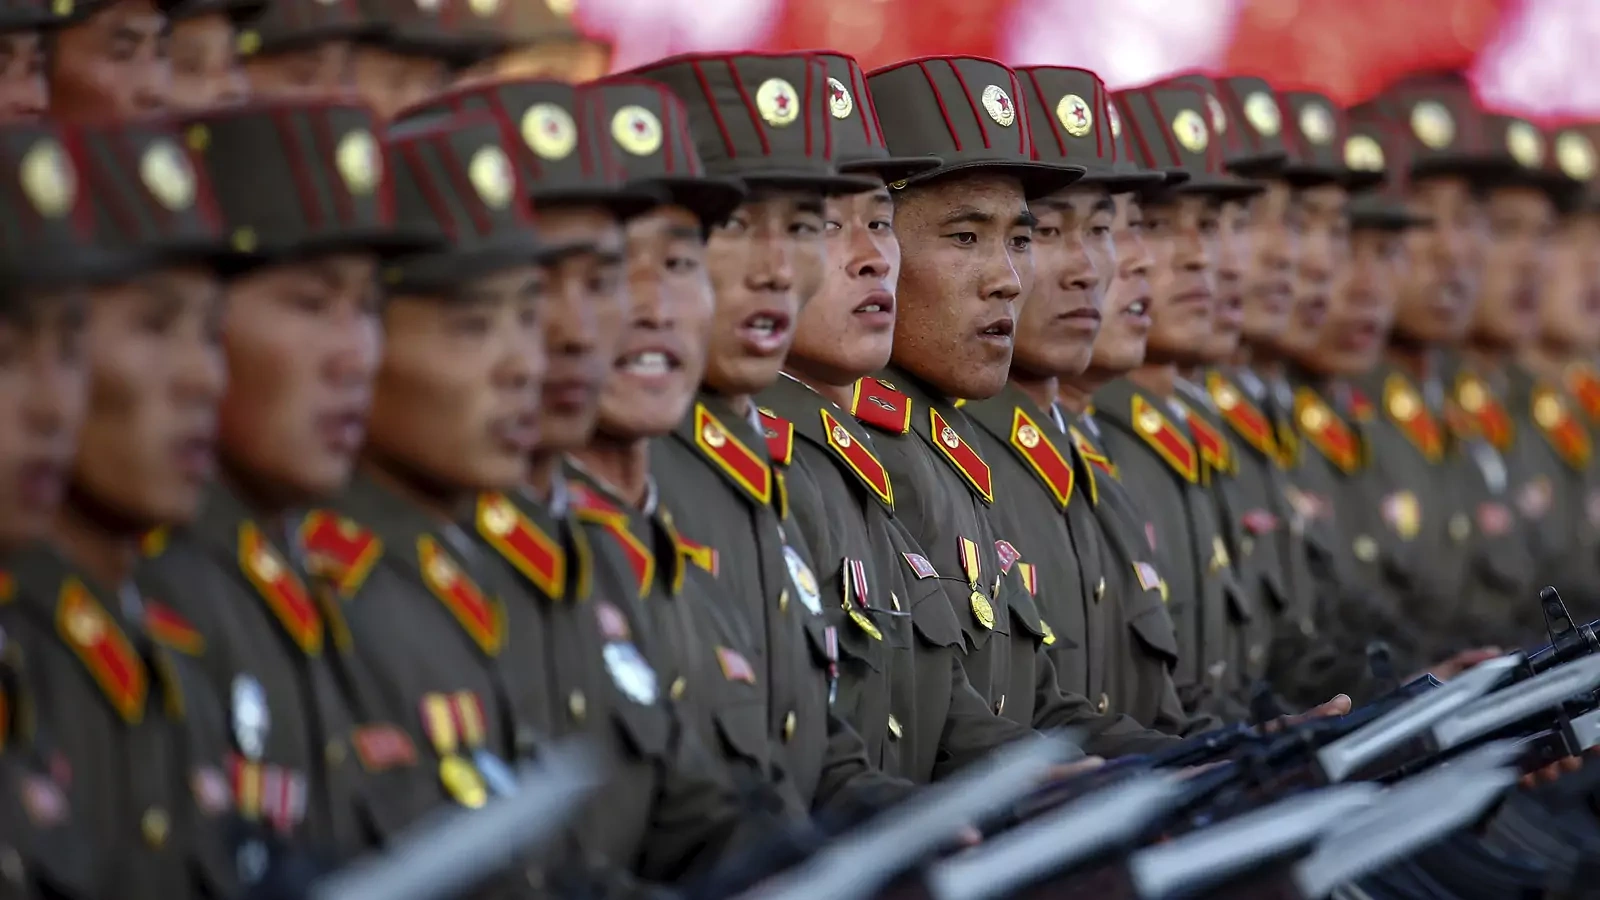 North Korean soldiers participate in a military parade overseen by the country's leader, Kim Jong-un, in Pyongyang on October 10, 2015.